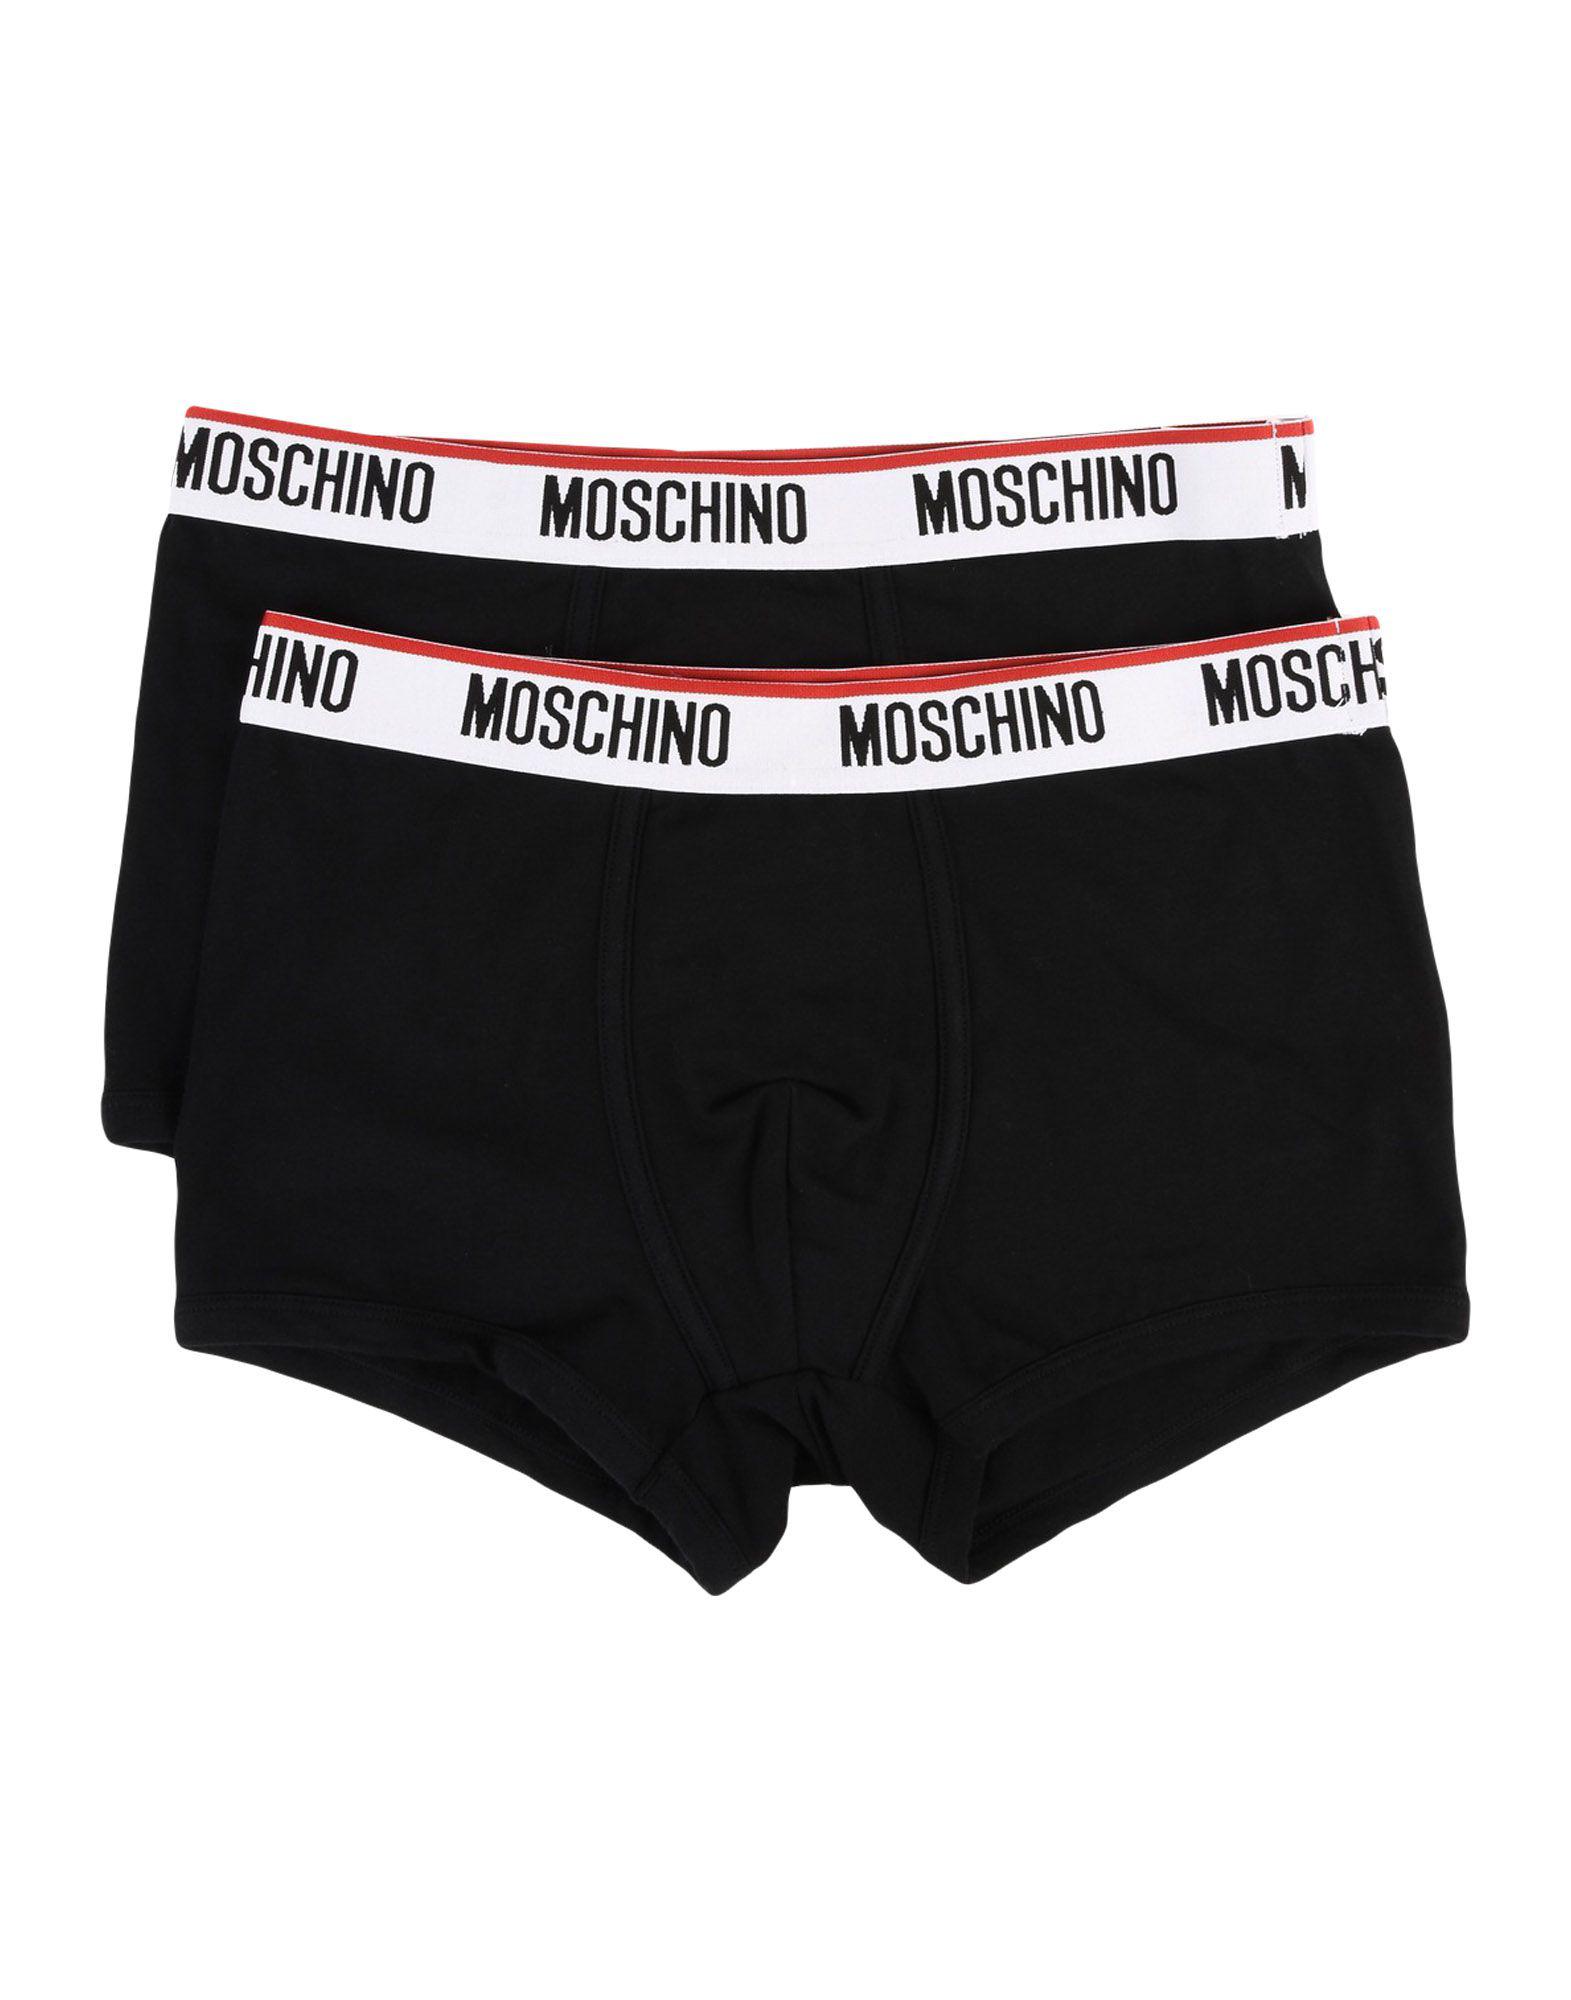 Moschino Cotton Boxer in Black for Men - Lyst